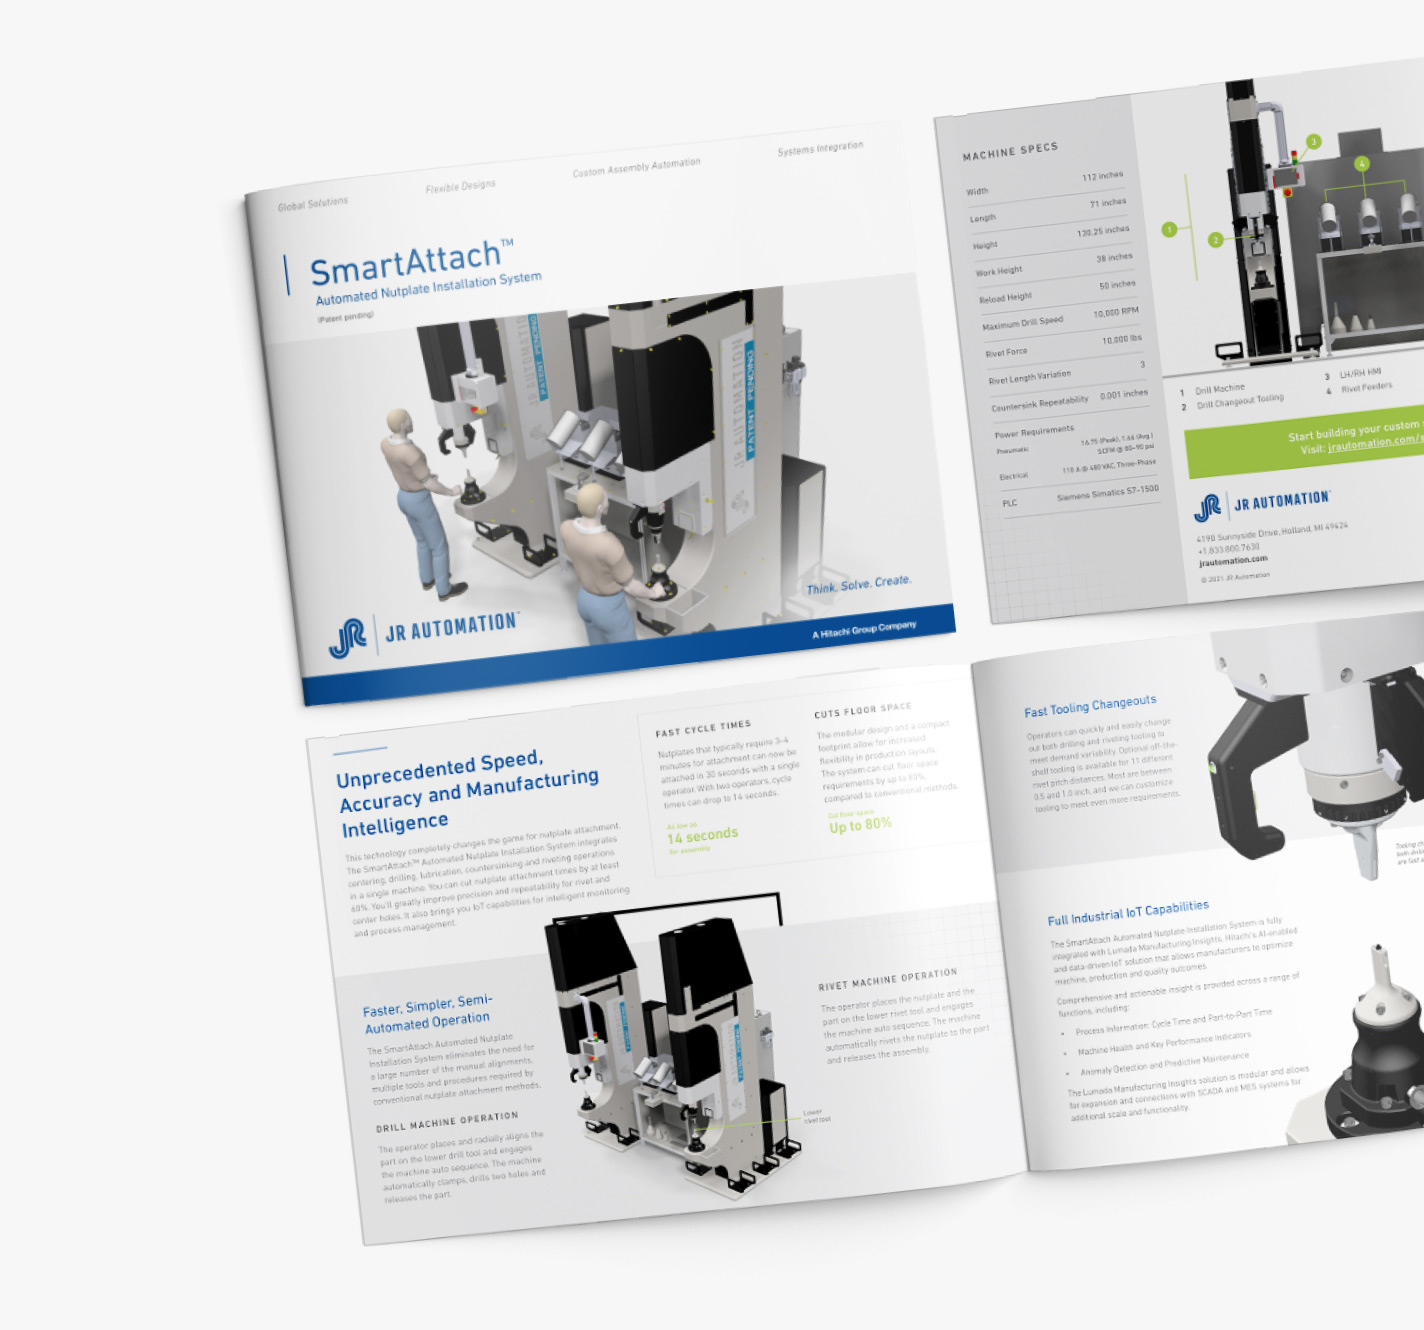 JR Automation Aerospace Manufacturing Product Launch Literature